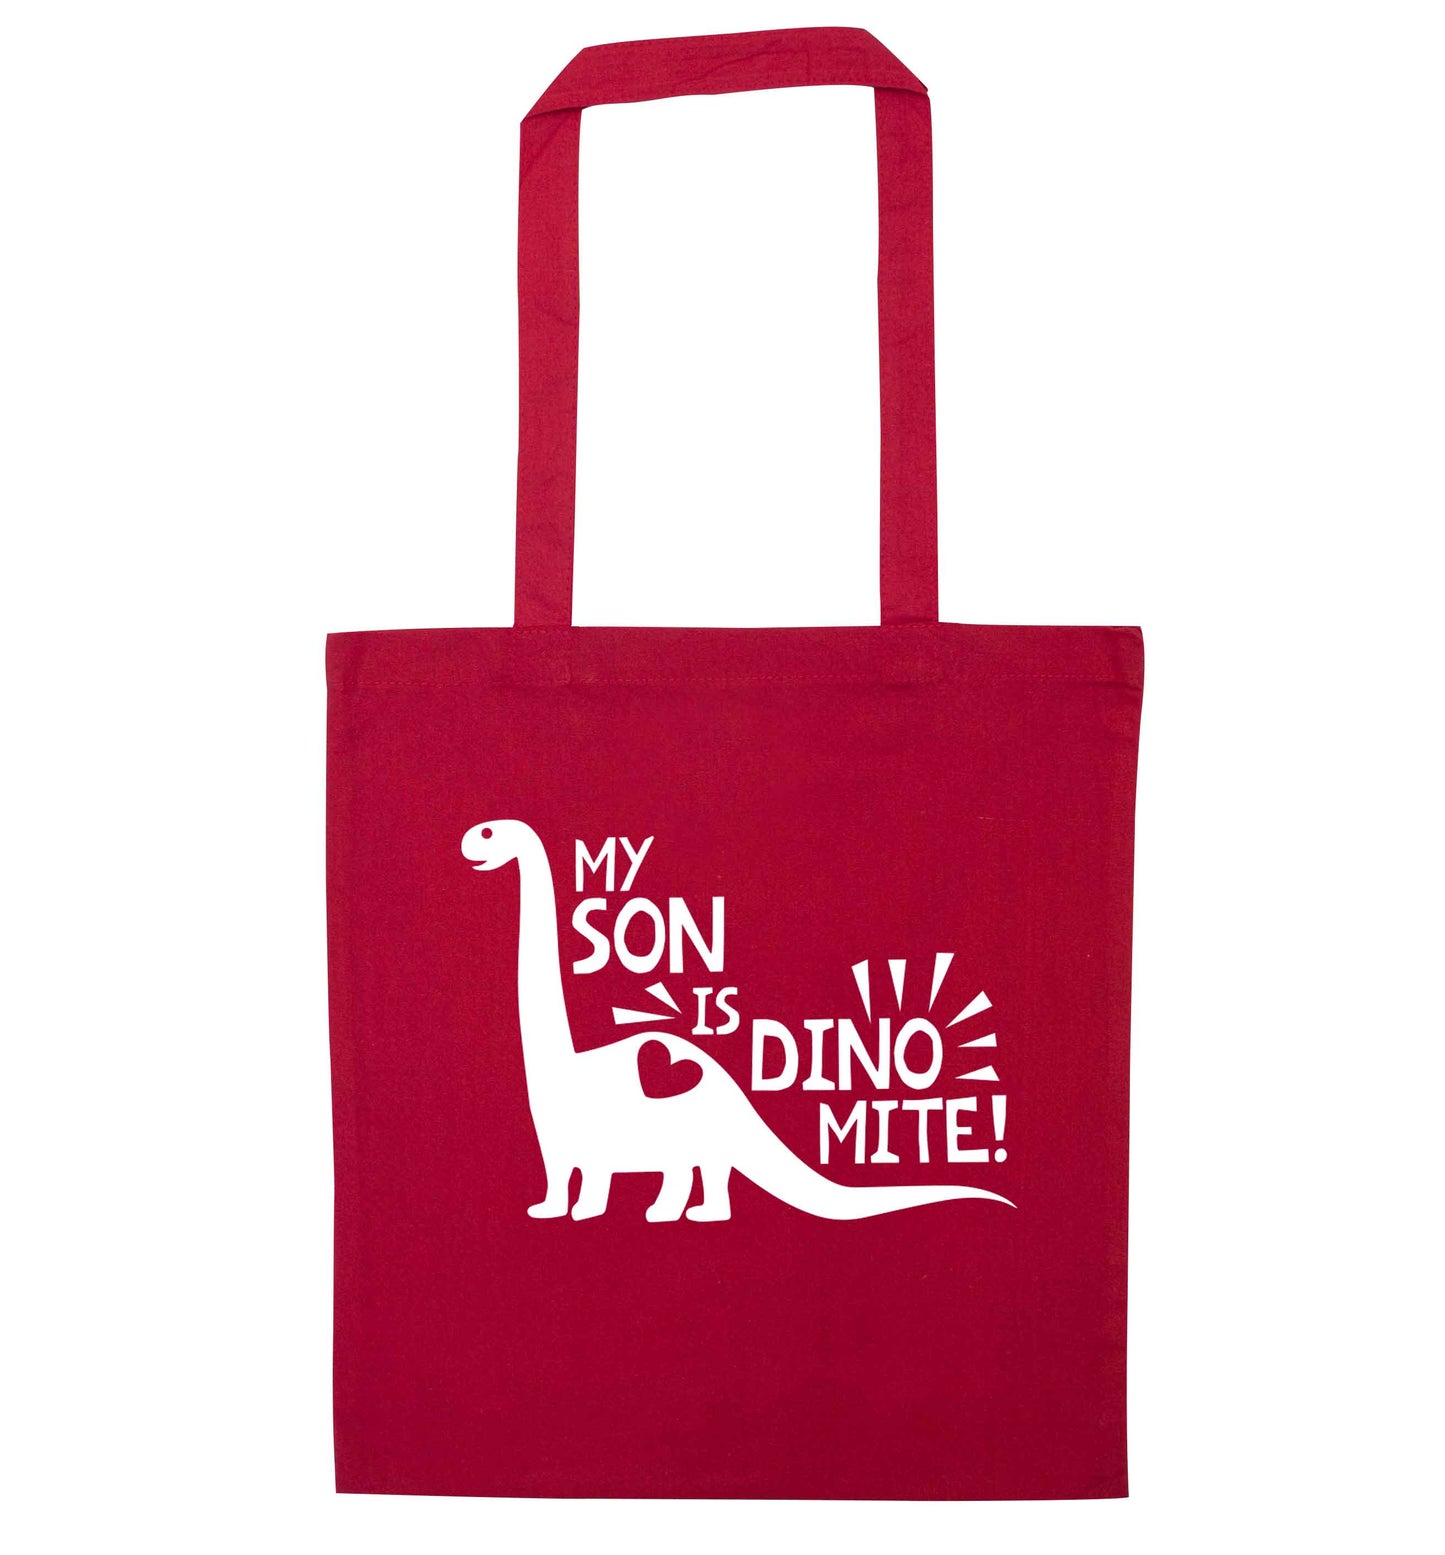 My son is dinomite! red tote bag